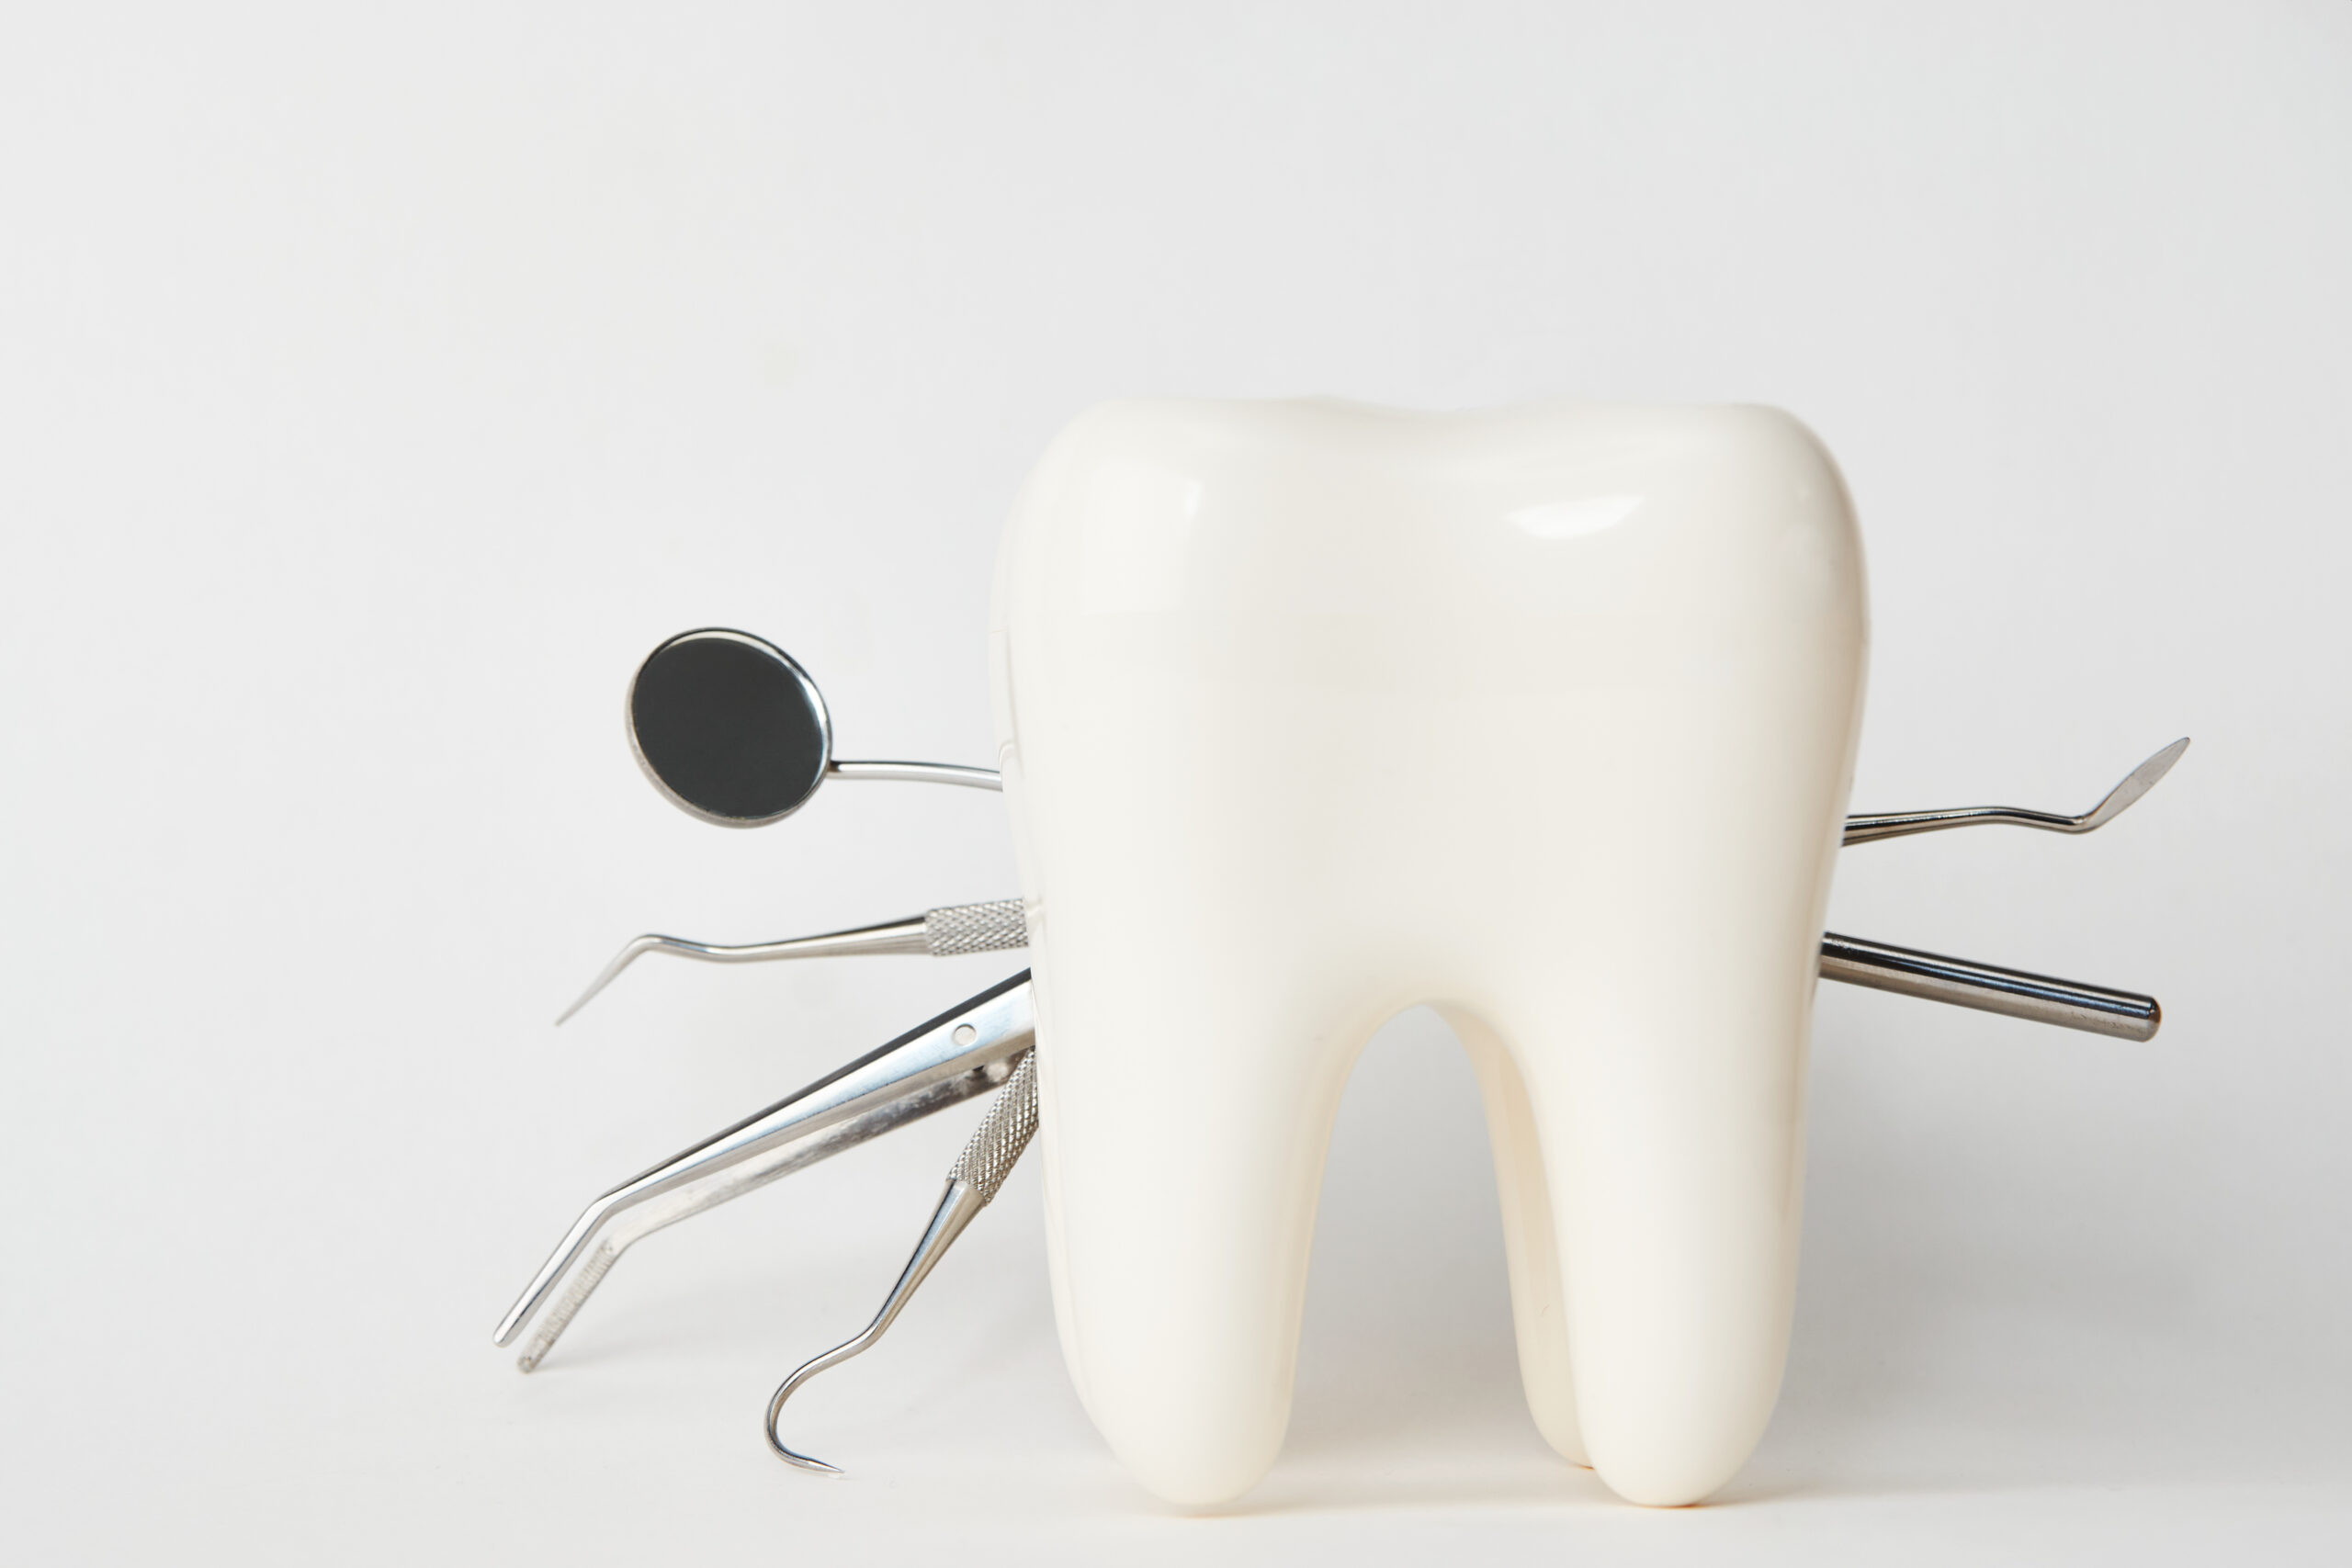 A dental tooth model with metal dentistry tools.